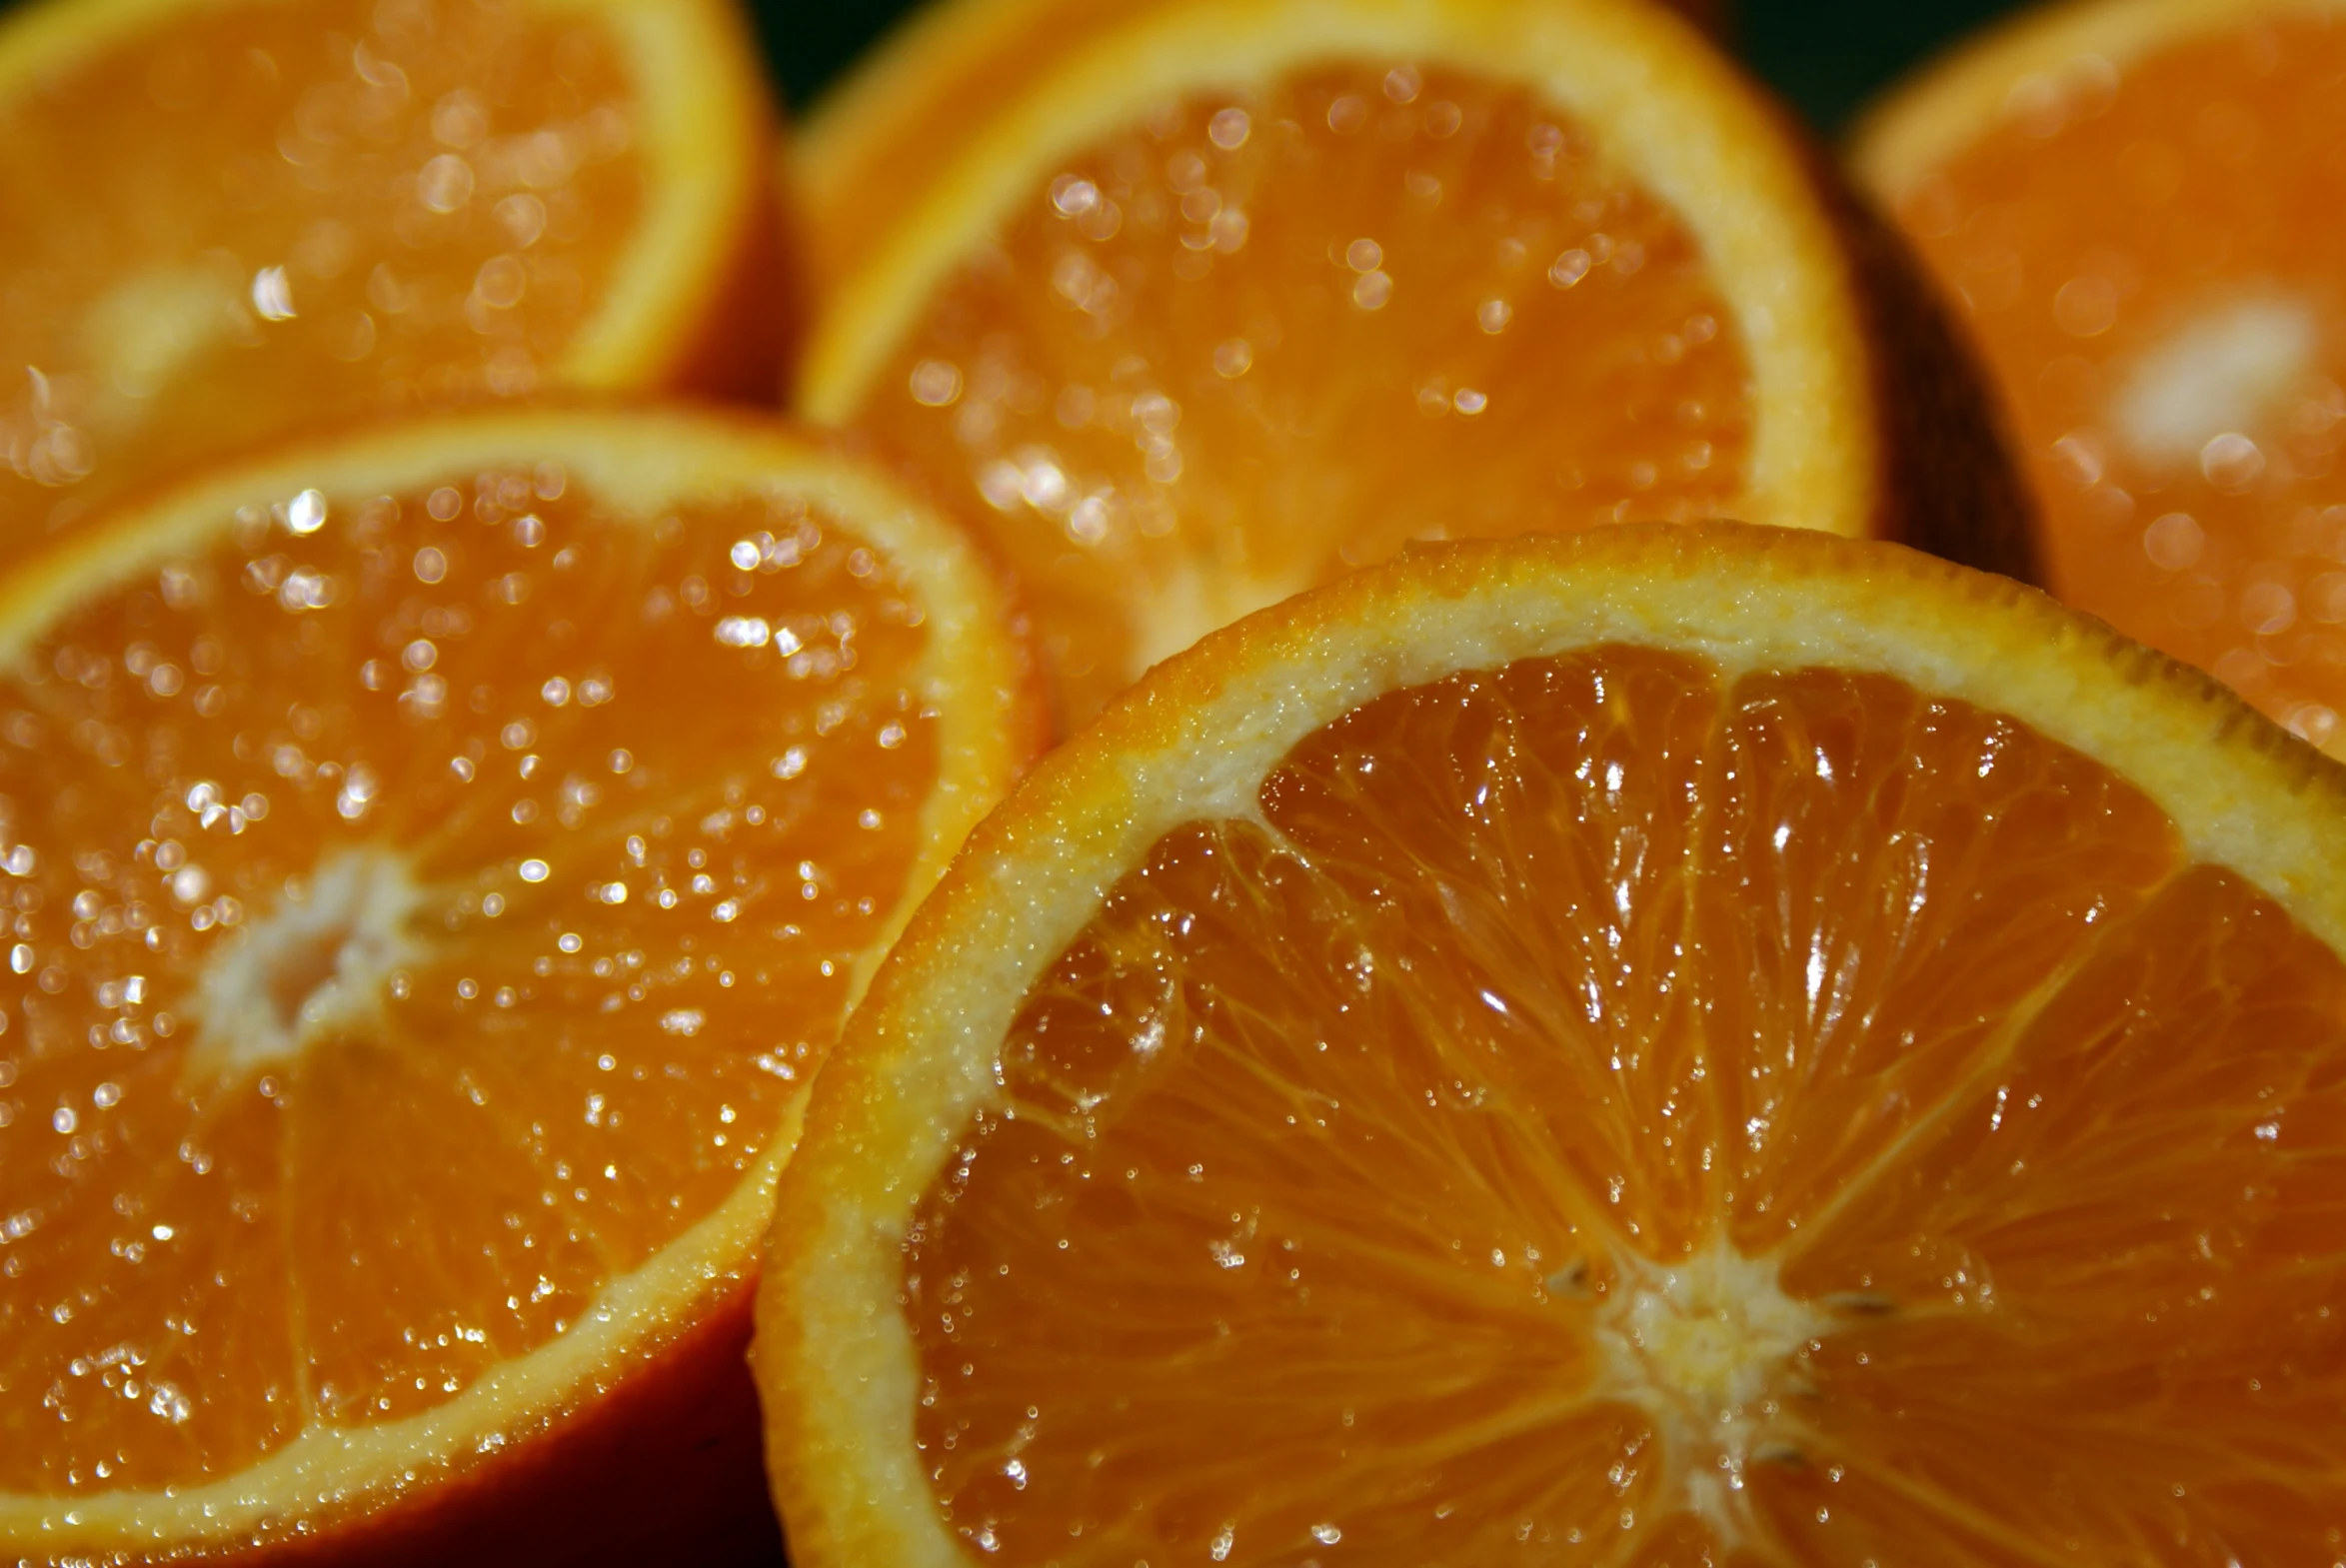 an orange and its halves with many drops on them